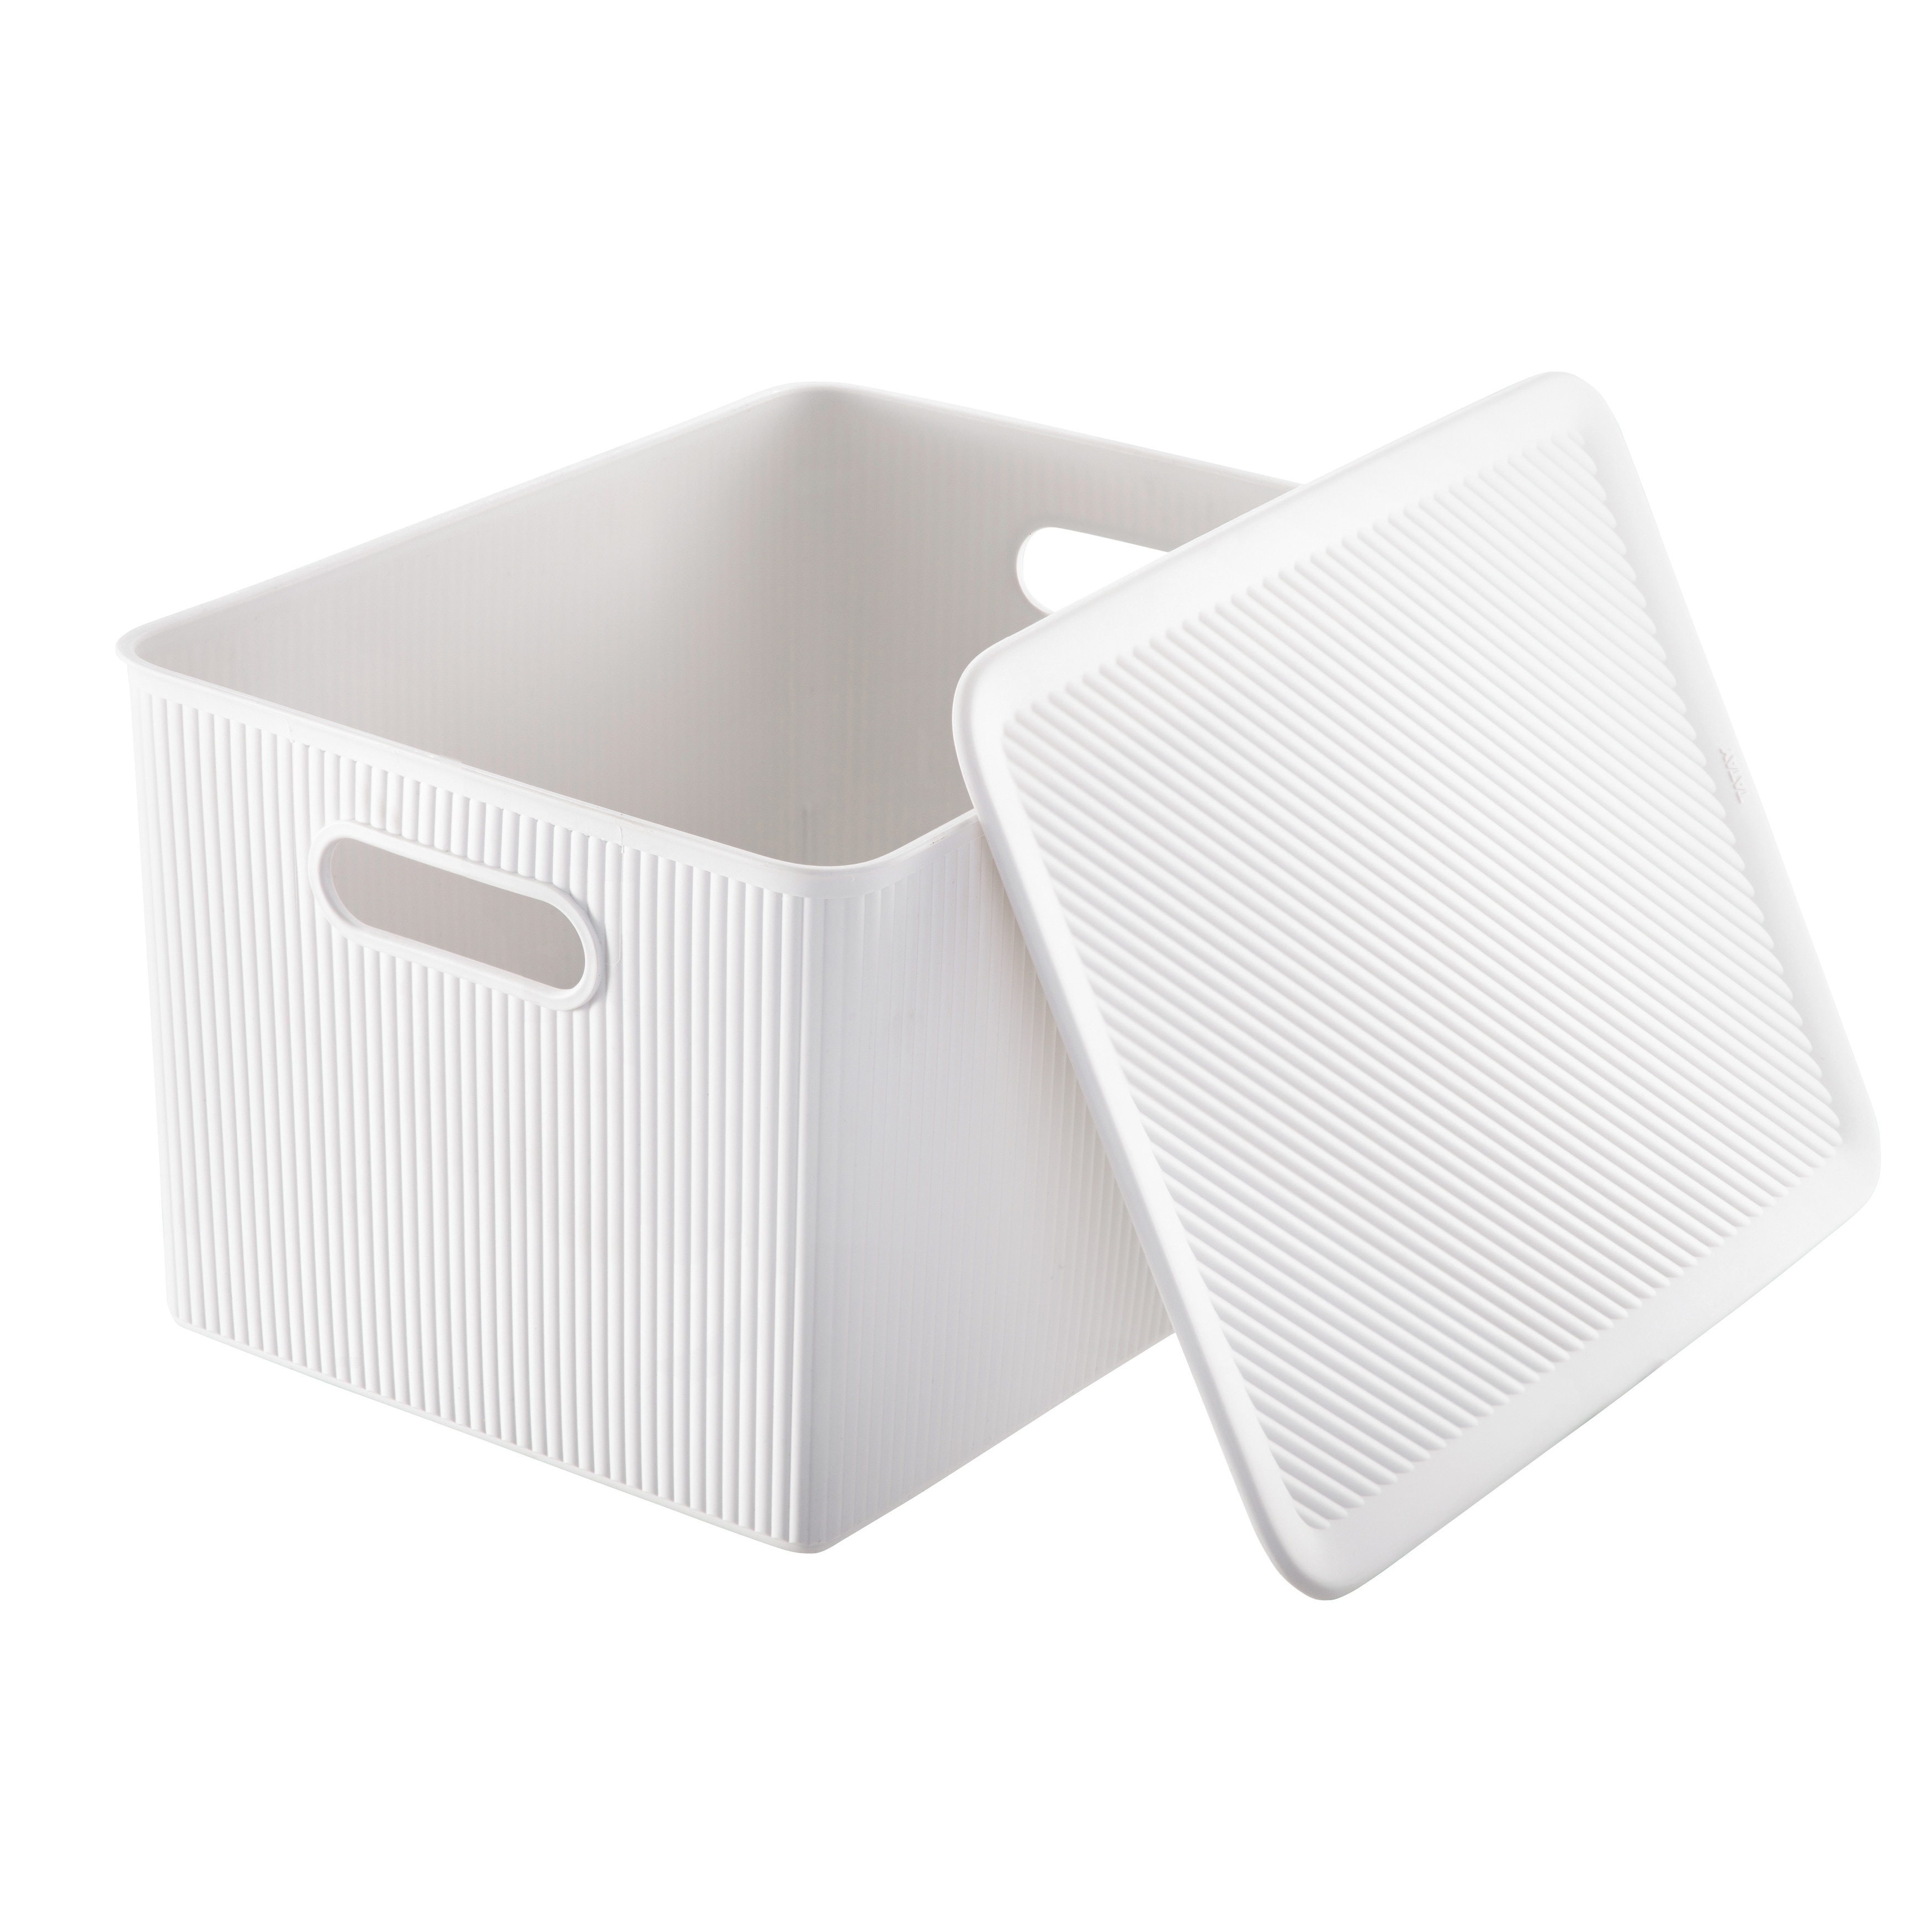 Decorative Plastic Open Home Storage Bins Organizer Baskets, Medium White  (1 Pack) Container Boxes for Organizing Closet Shelves Drawer Shelf -  Ribbed